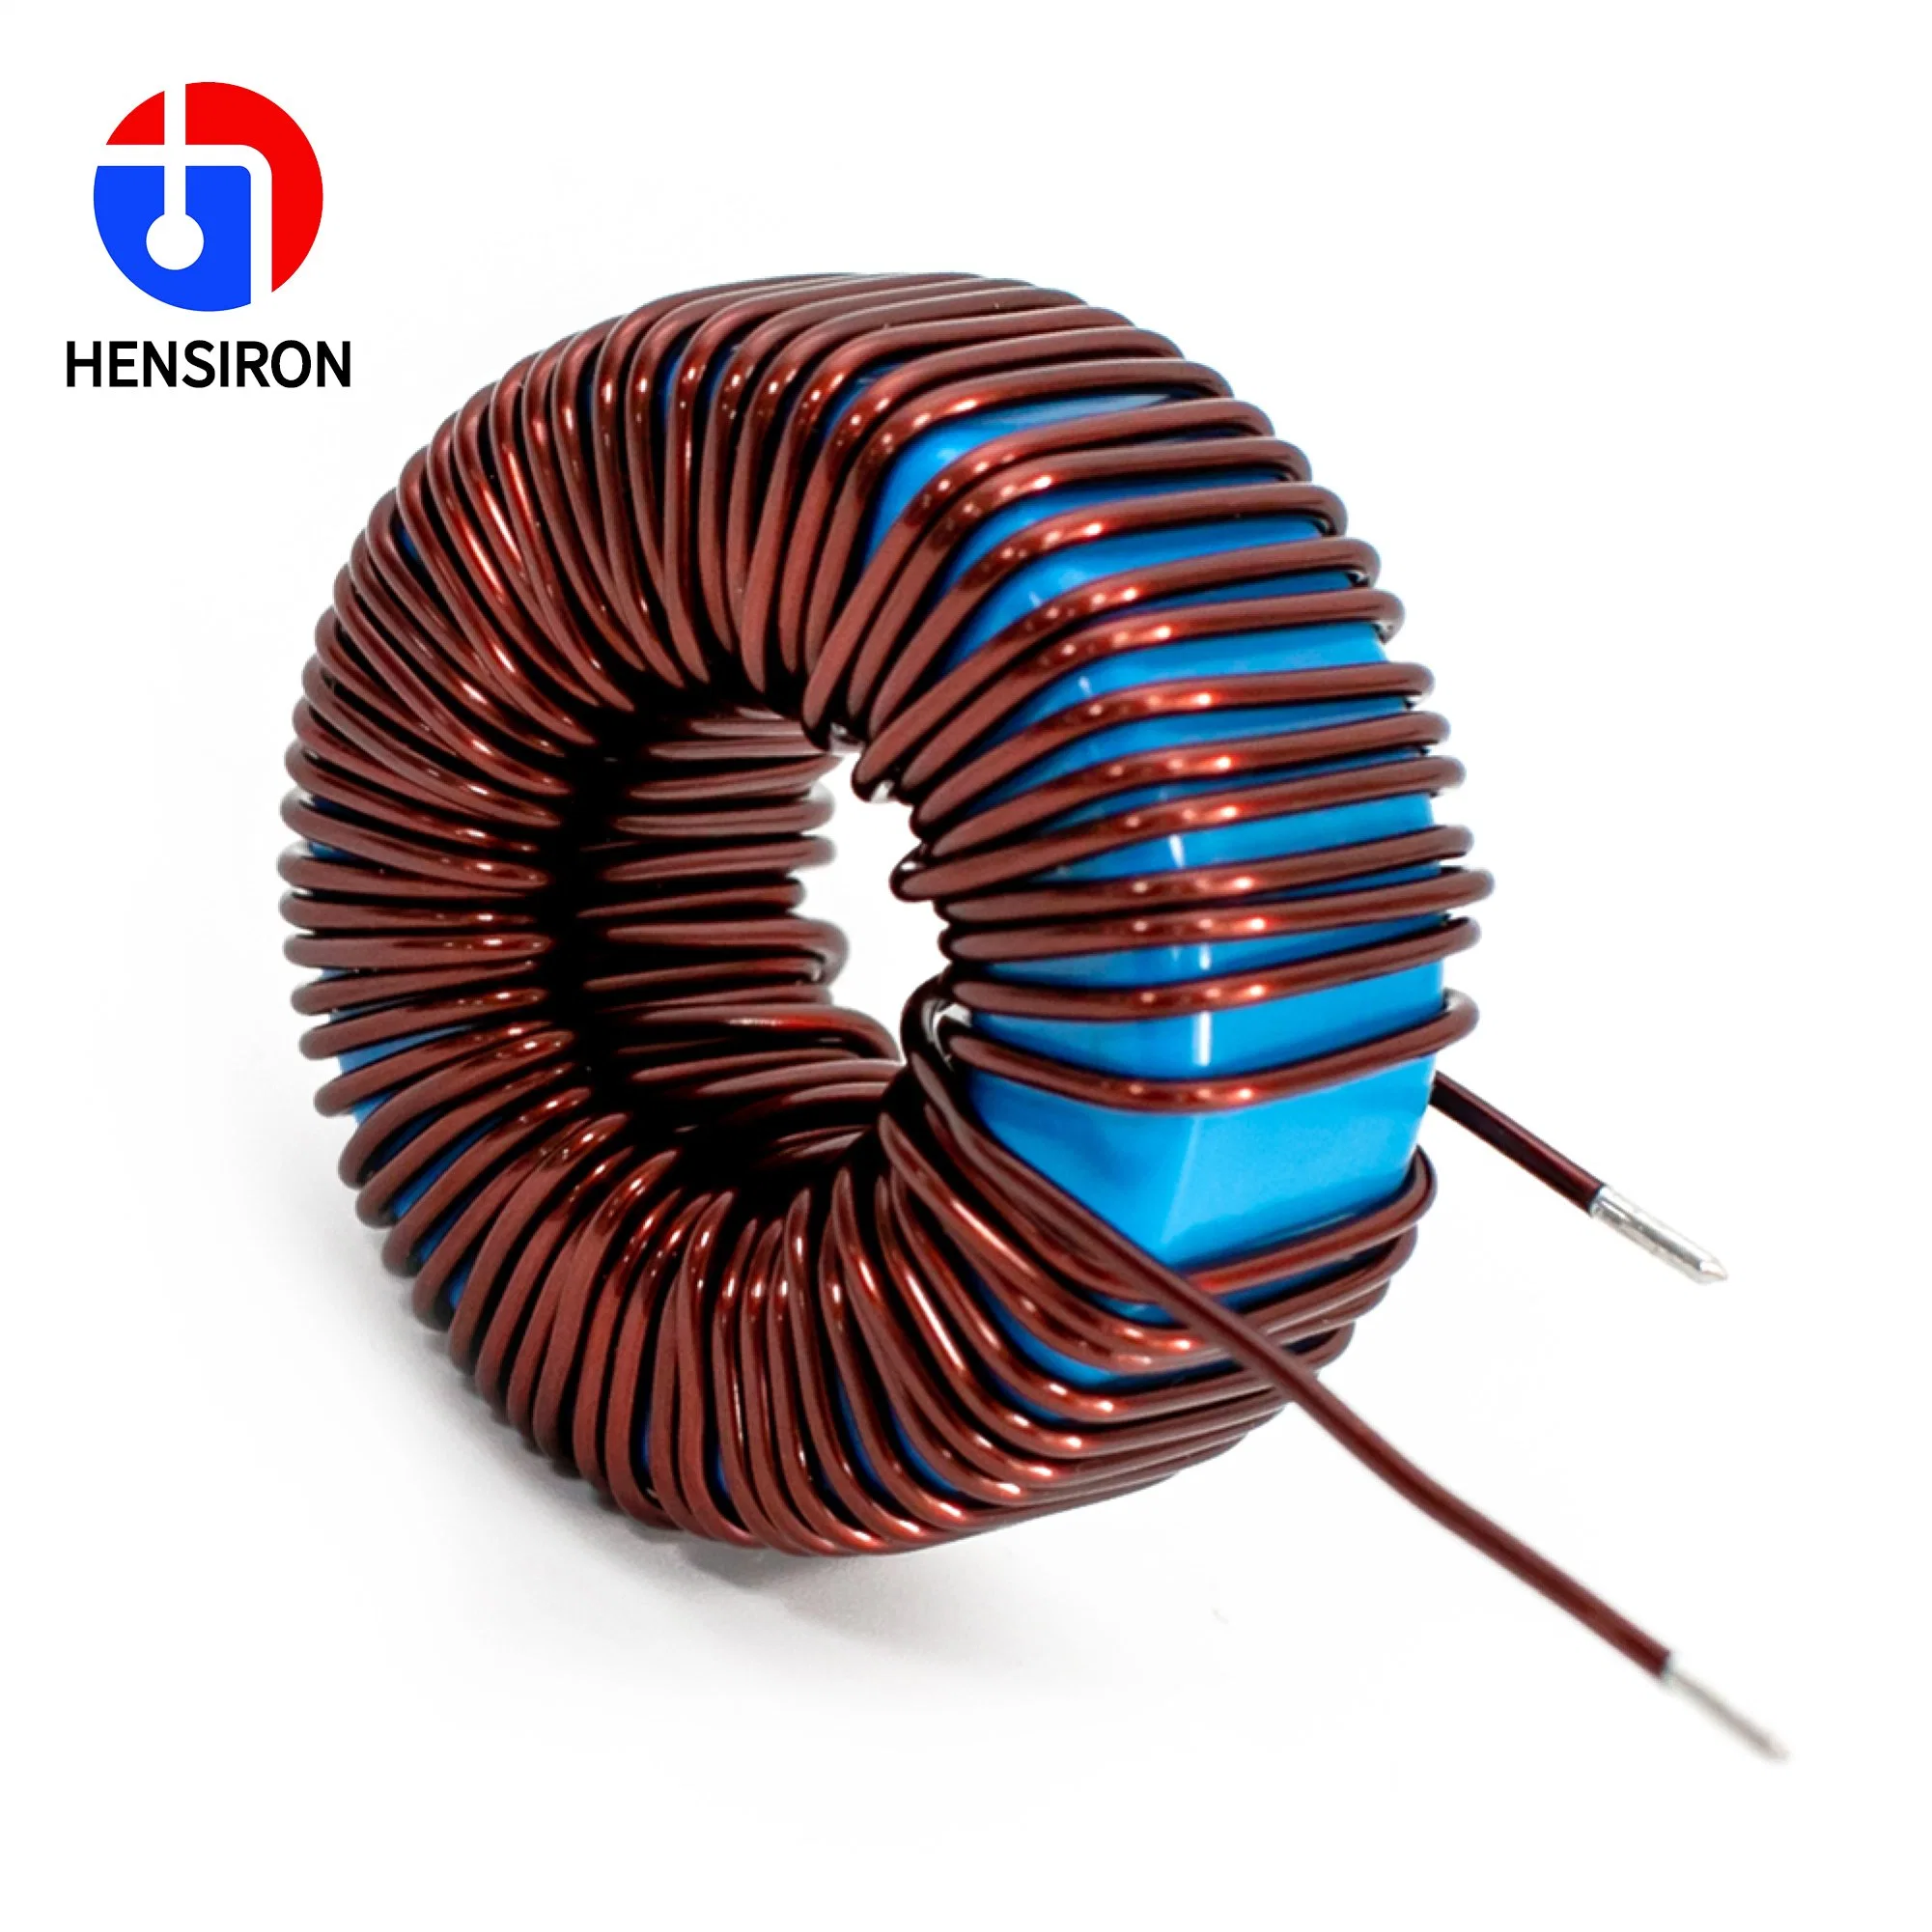 Ring Core OEM Differential Mode Big Current Toroidal Choke Coil Inductor for Power Inverter